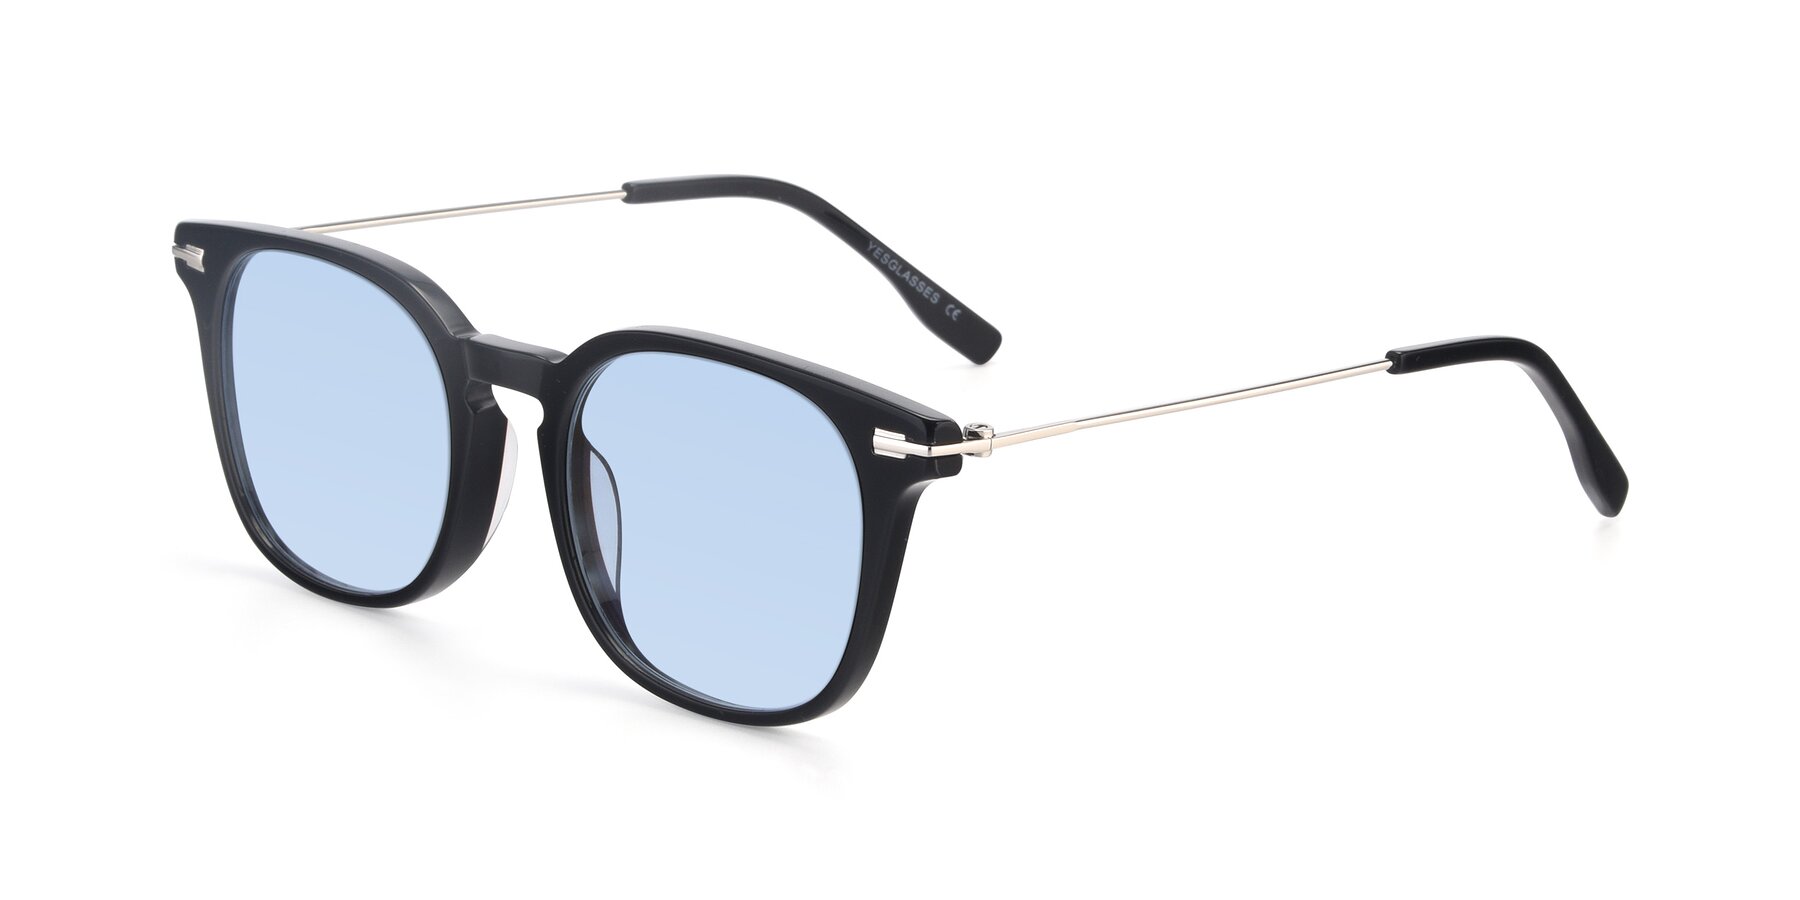 Angle of 17711 in Black with Light Blue Tinted Lenses